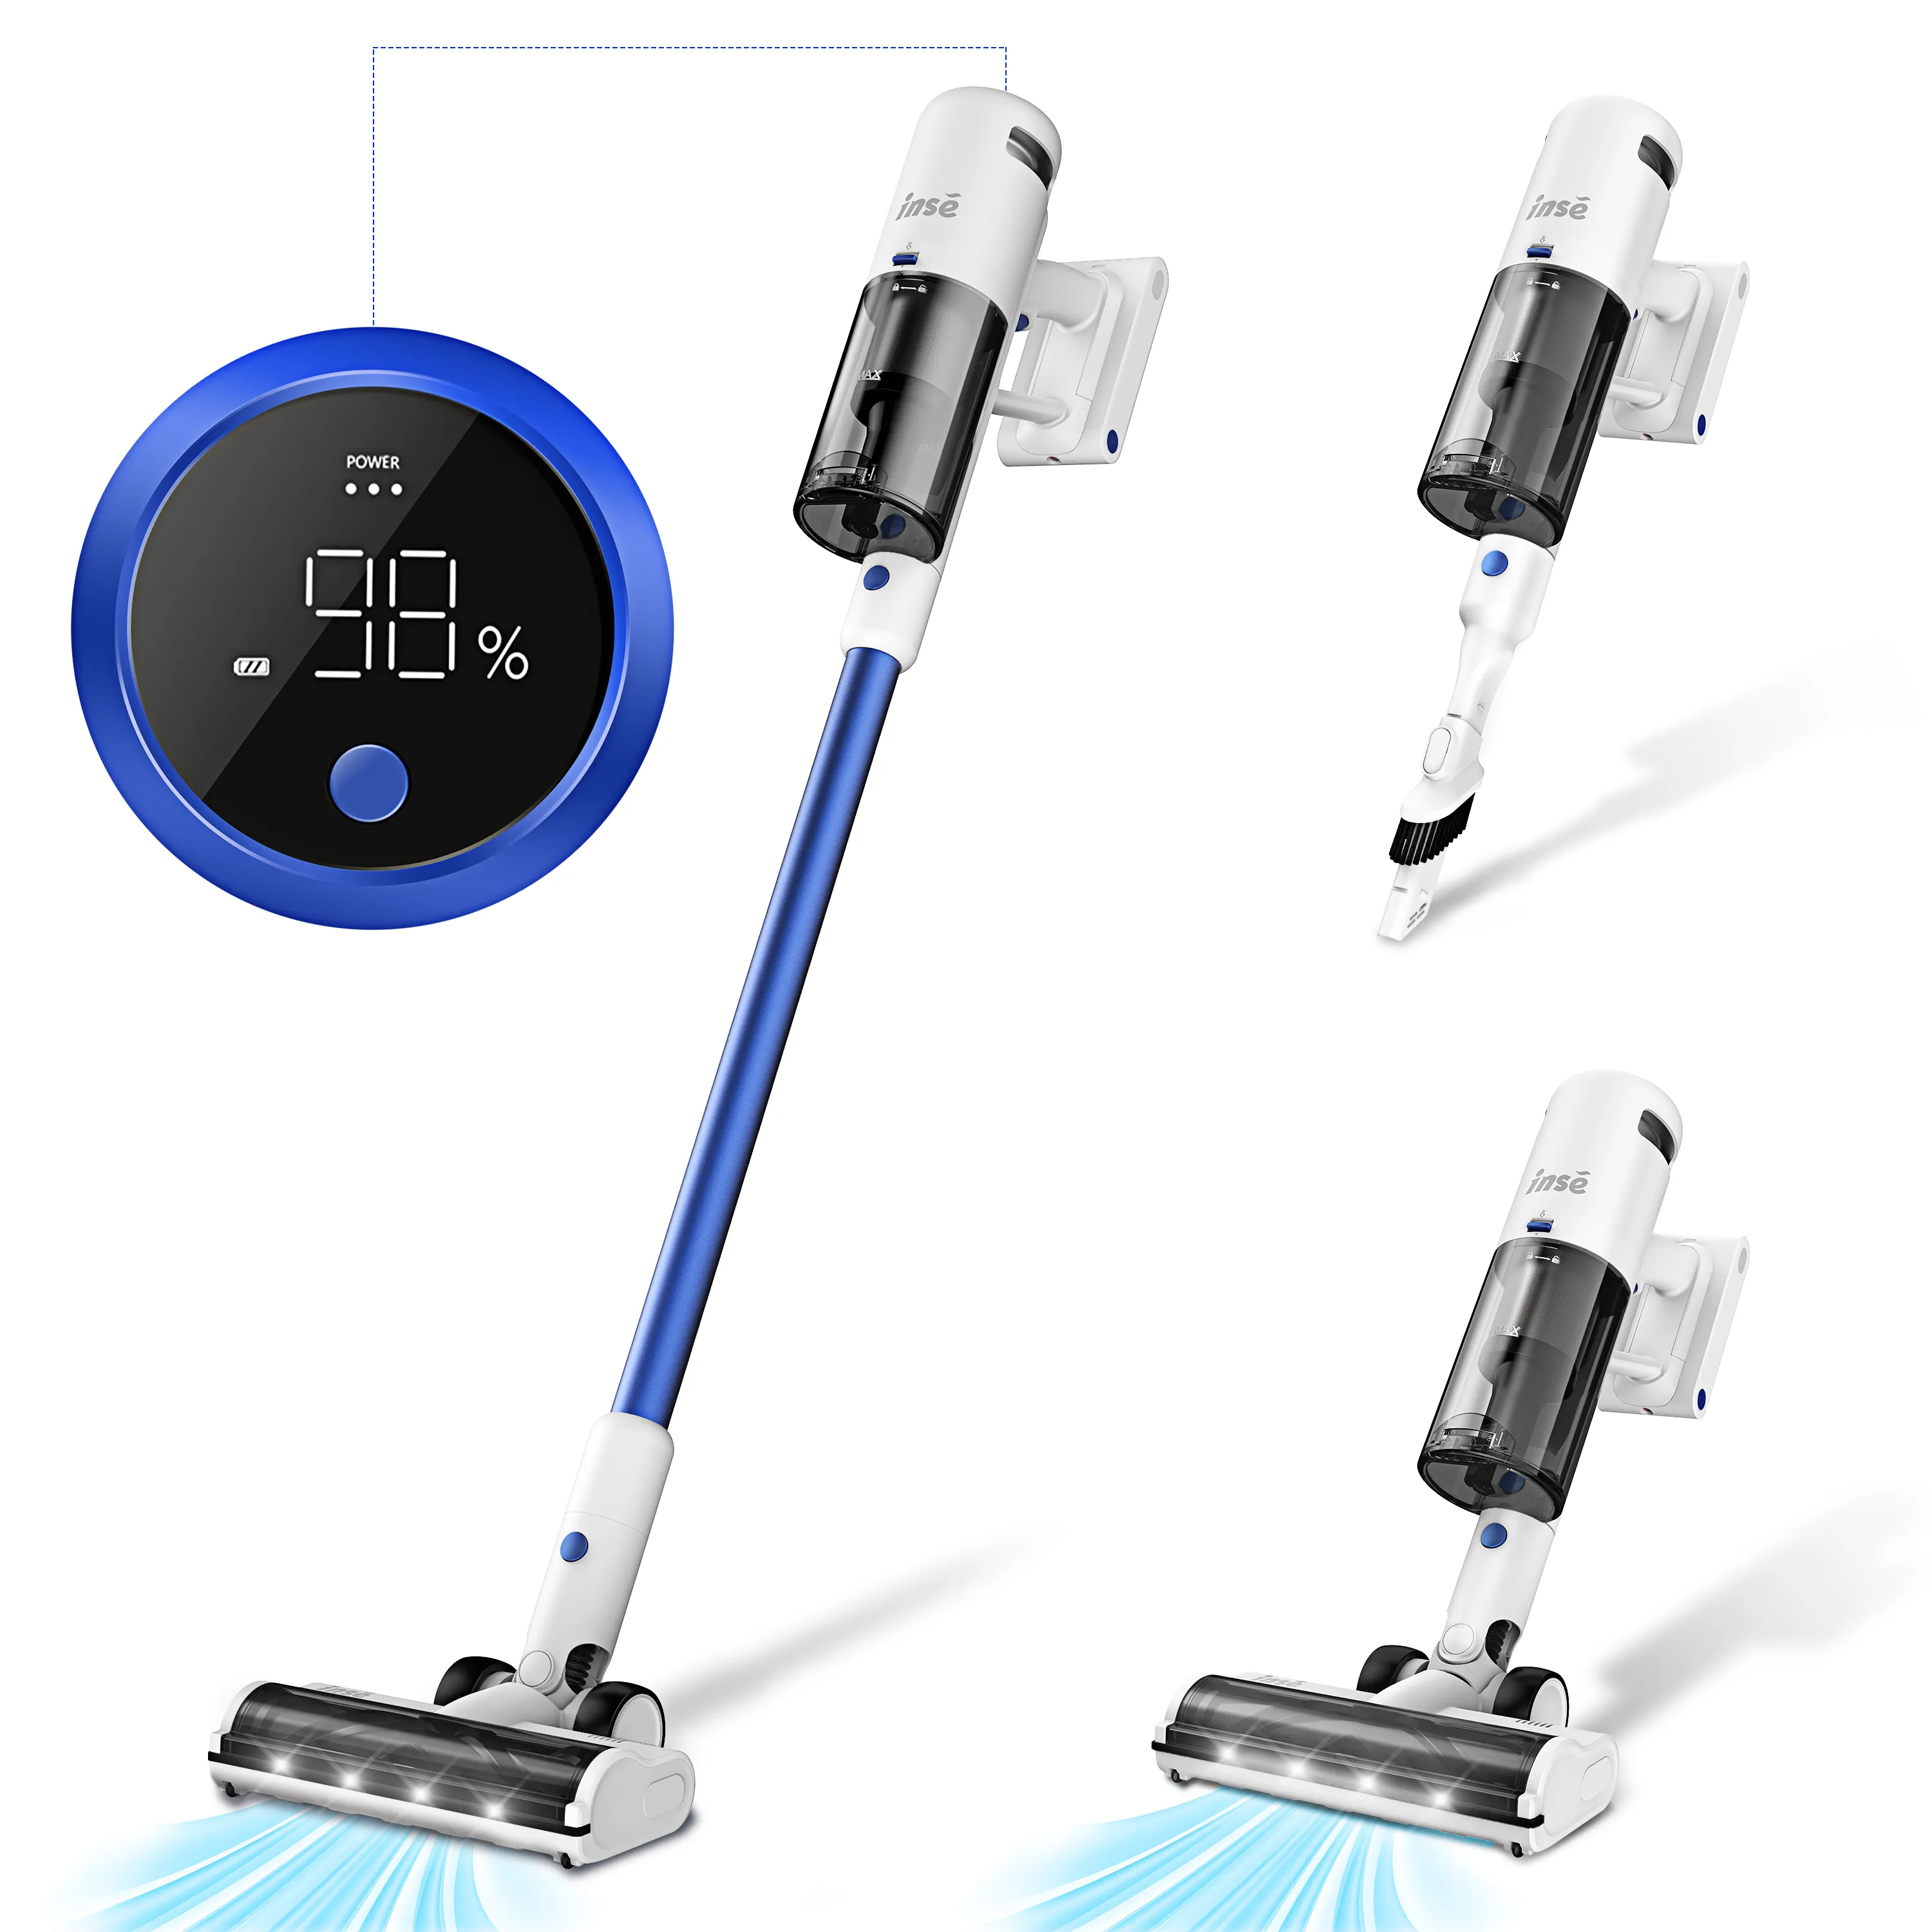 INSE Cordless Vacuum Cleaner 30kPa, 6-in-1 Powerful Stick Vacuum Cleaner with LED Display, Max 60 Min Runtime, 450W Brushless Motor Vacuum Cleaner--V120 Blue